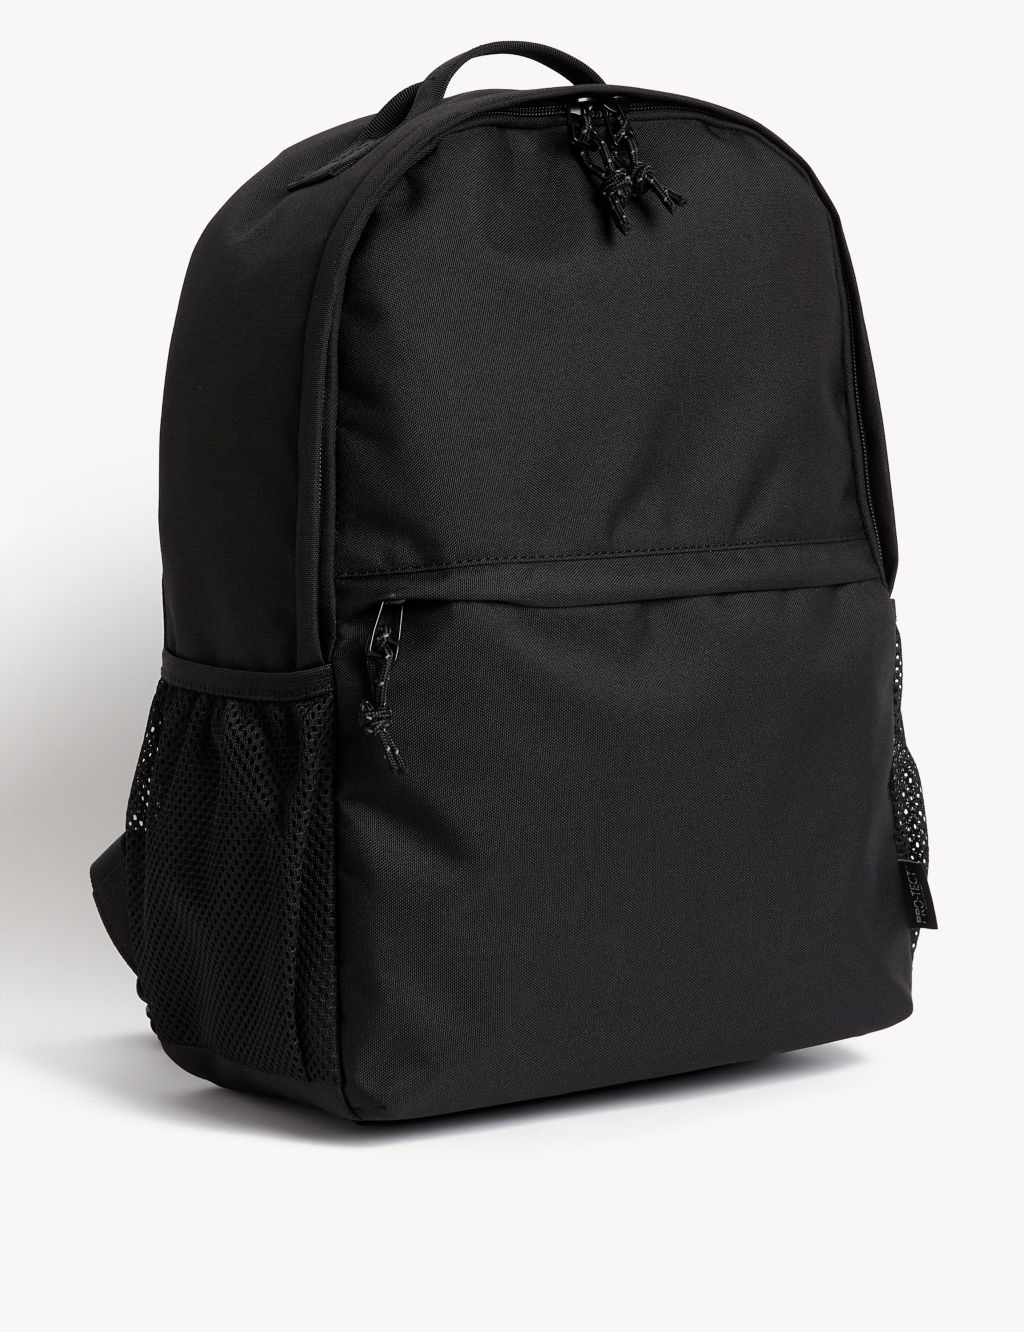 Recycled Polyester Pro-Tect™ Backpack image 1